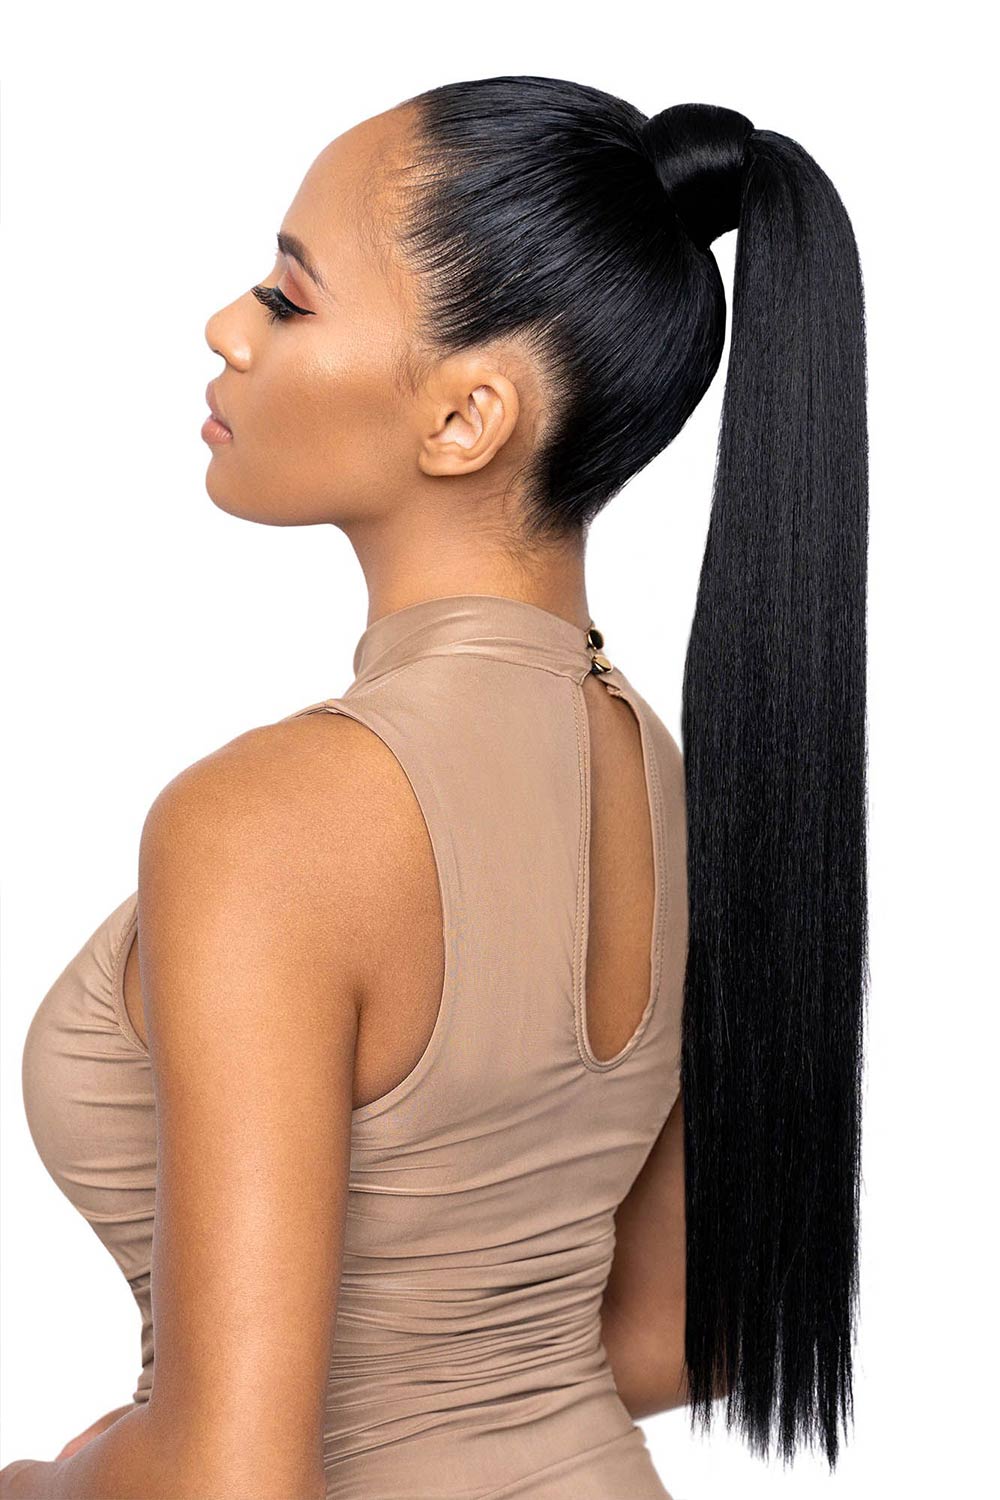 Straight Natural Color Ponytails Wrap Around Extensions 120-150g